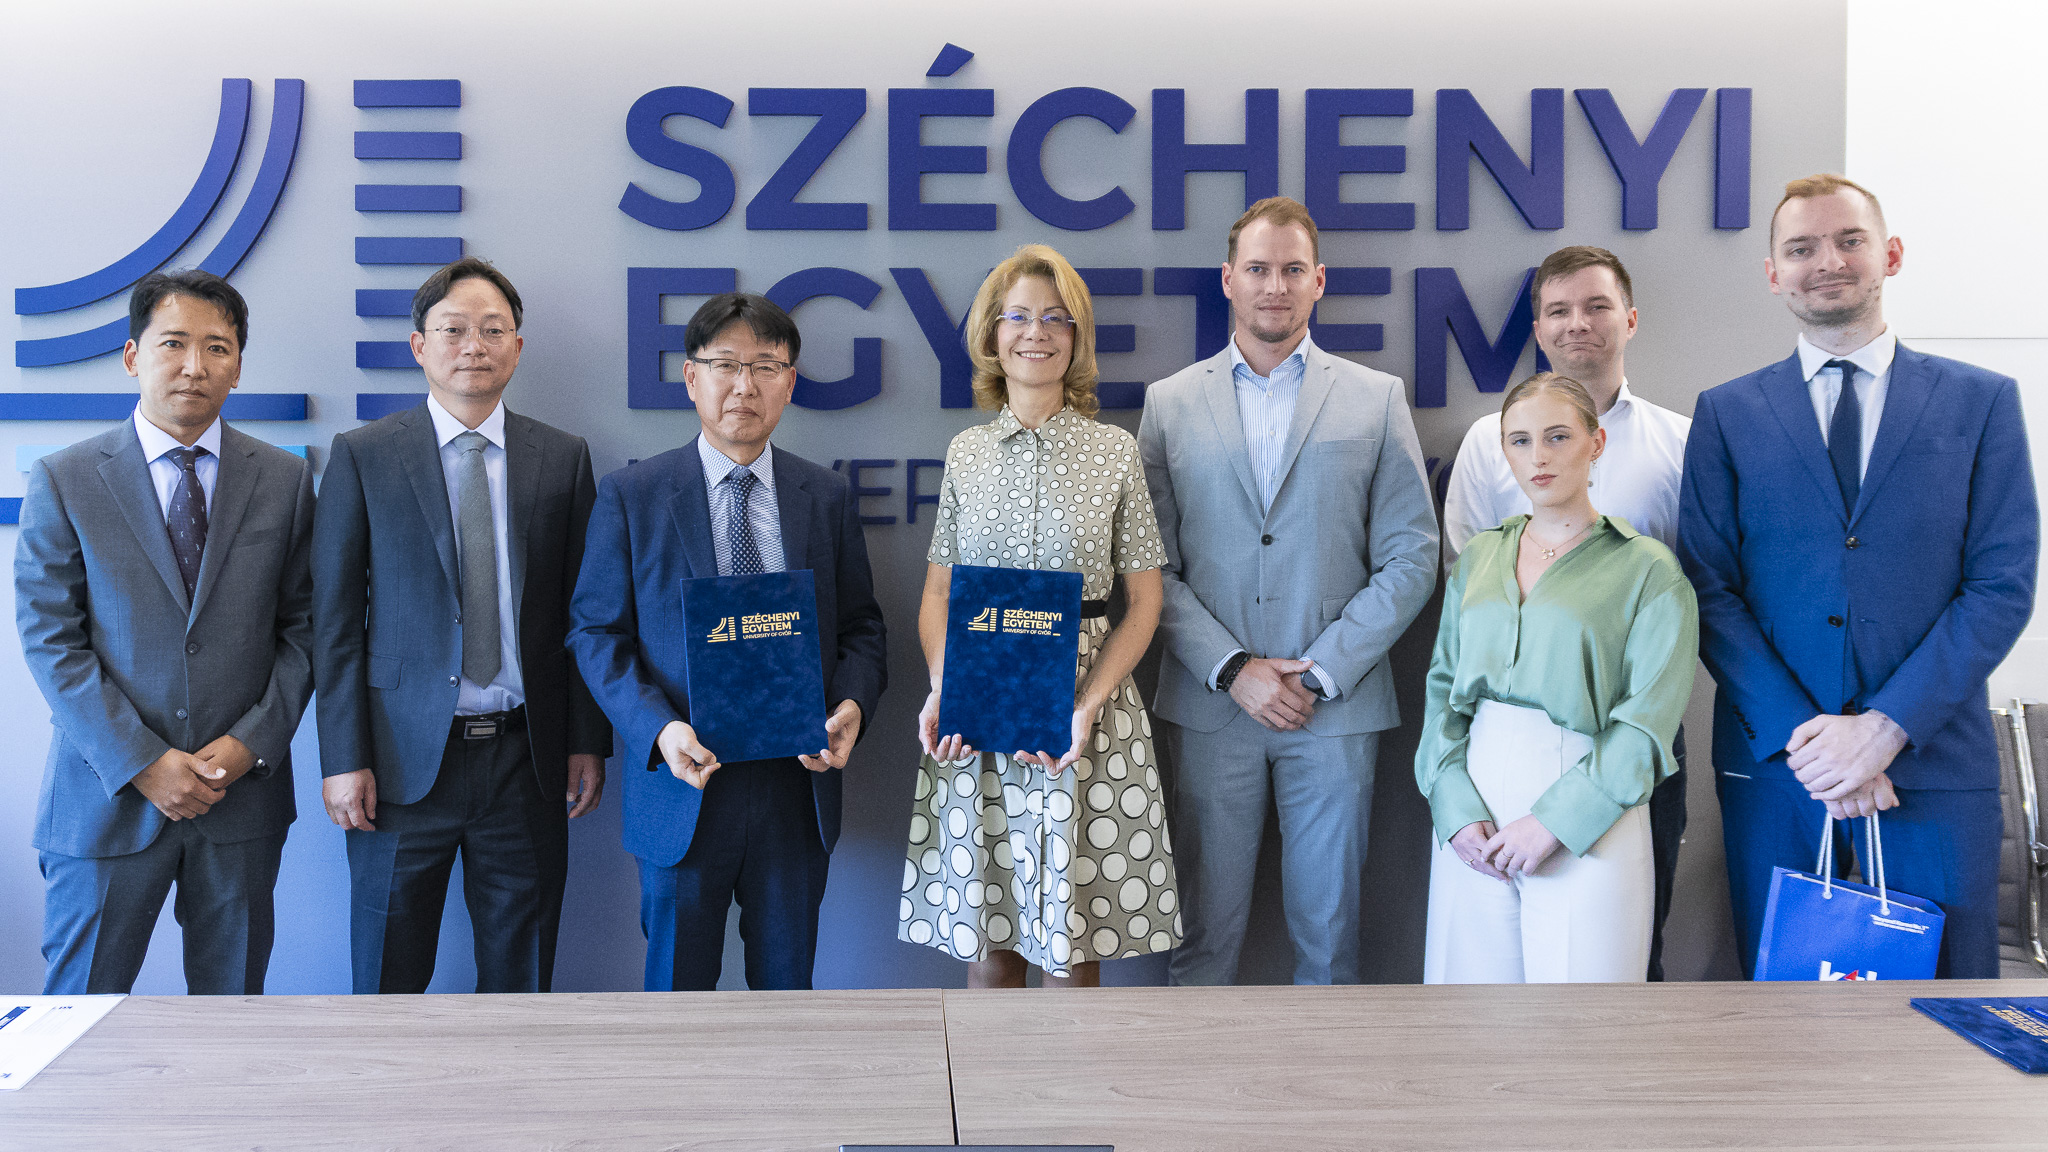 Representatives of the Korean Testing Laboratory and Széchenyi István University signed the agreement on the Győr campus